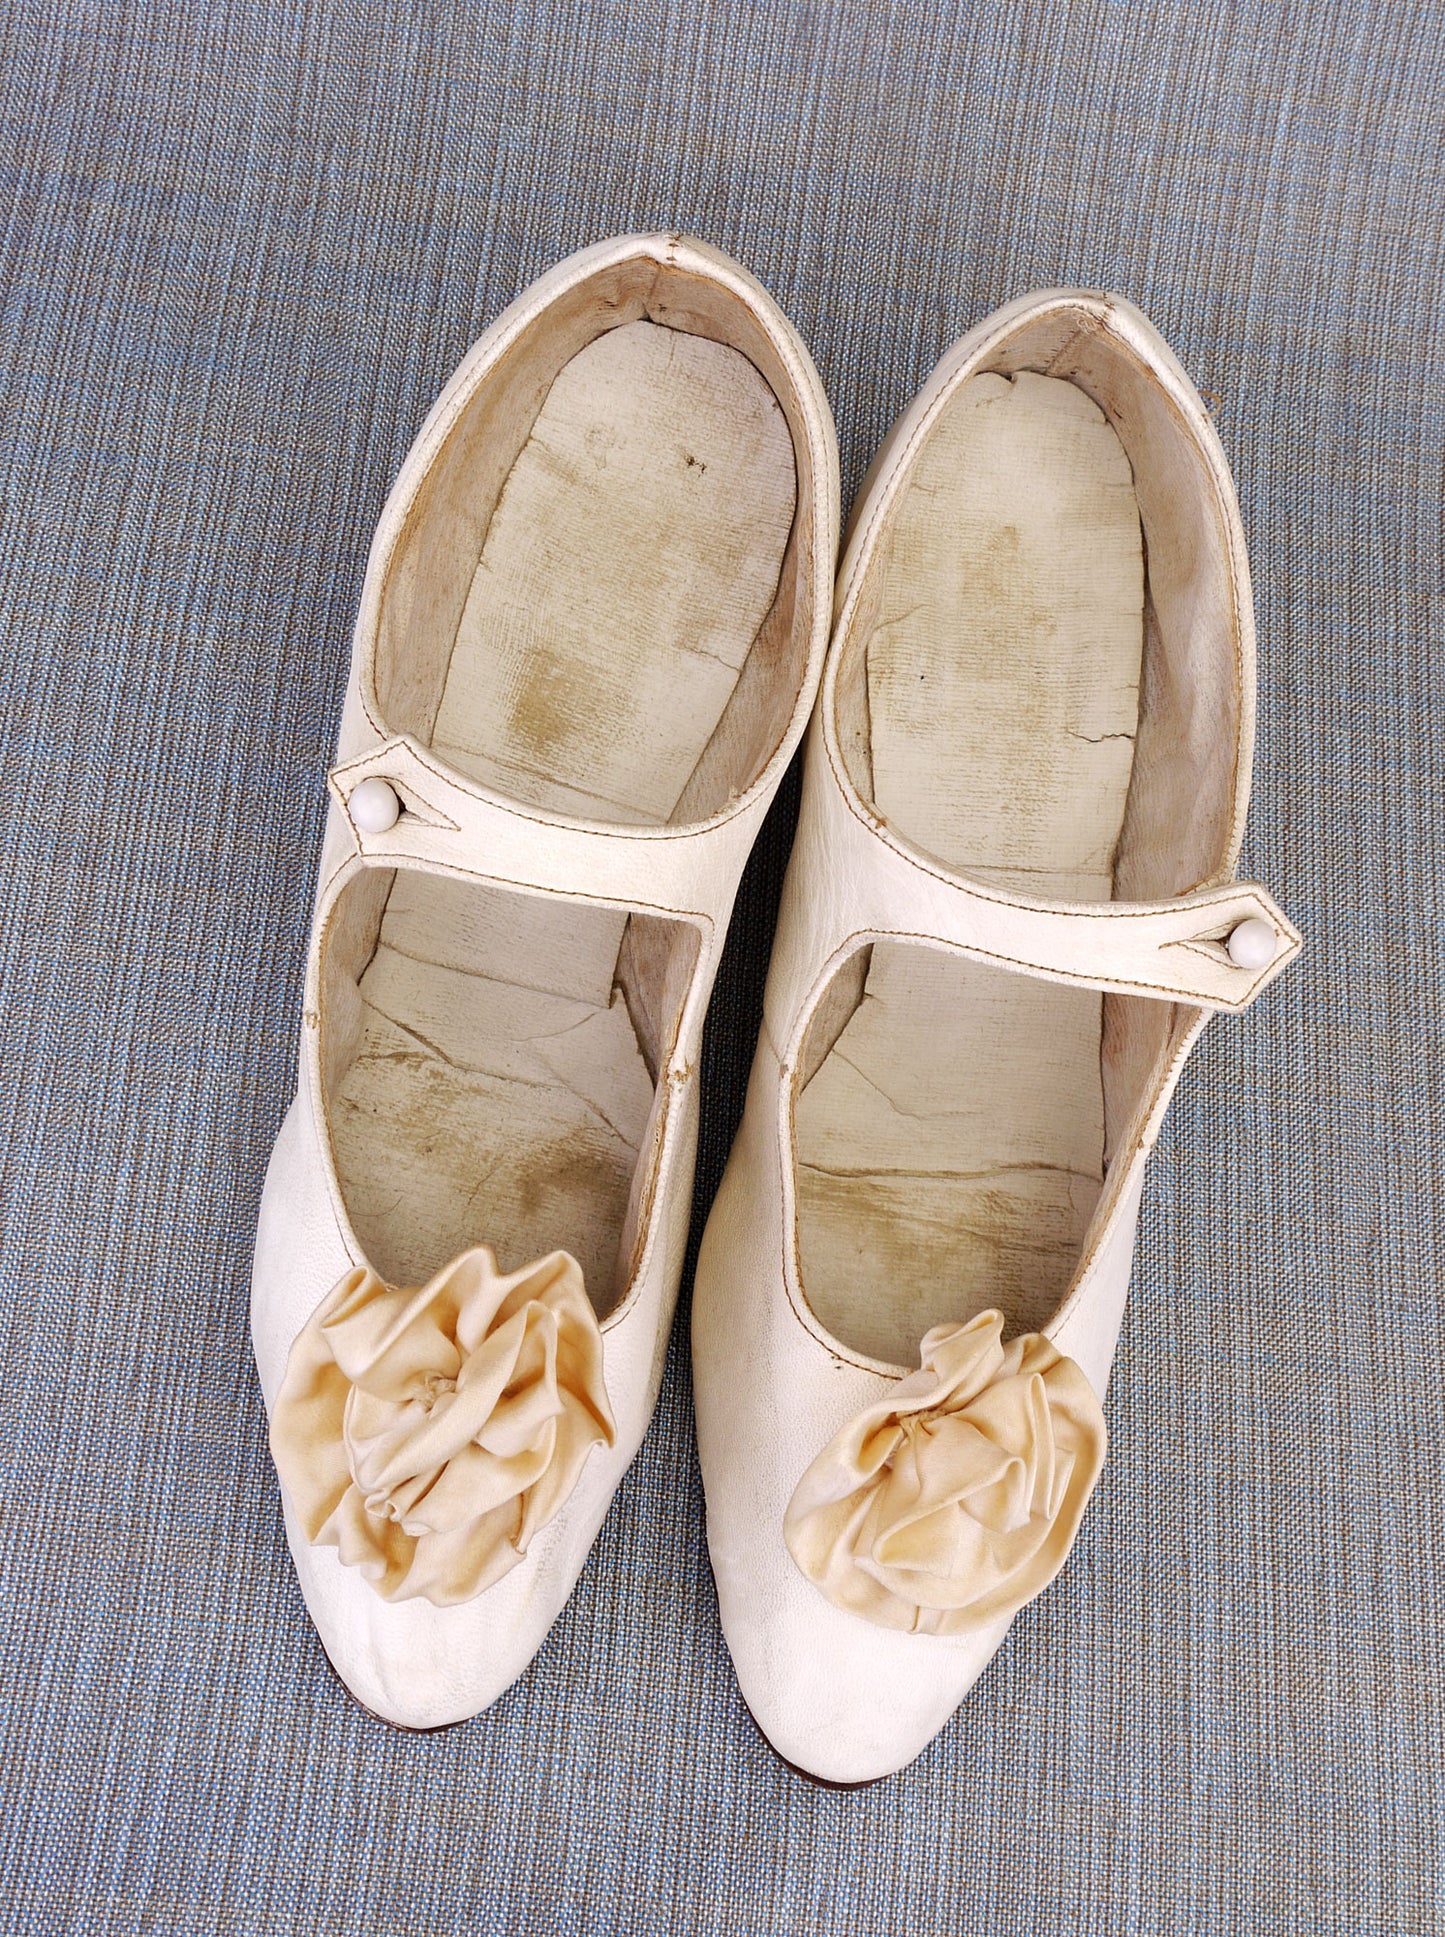 White Kid Victorian Wedding Shoes with Rosette c1900 UK 4